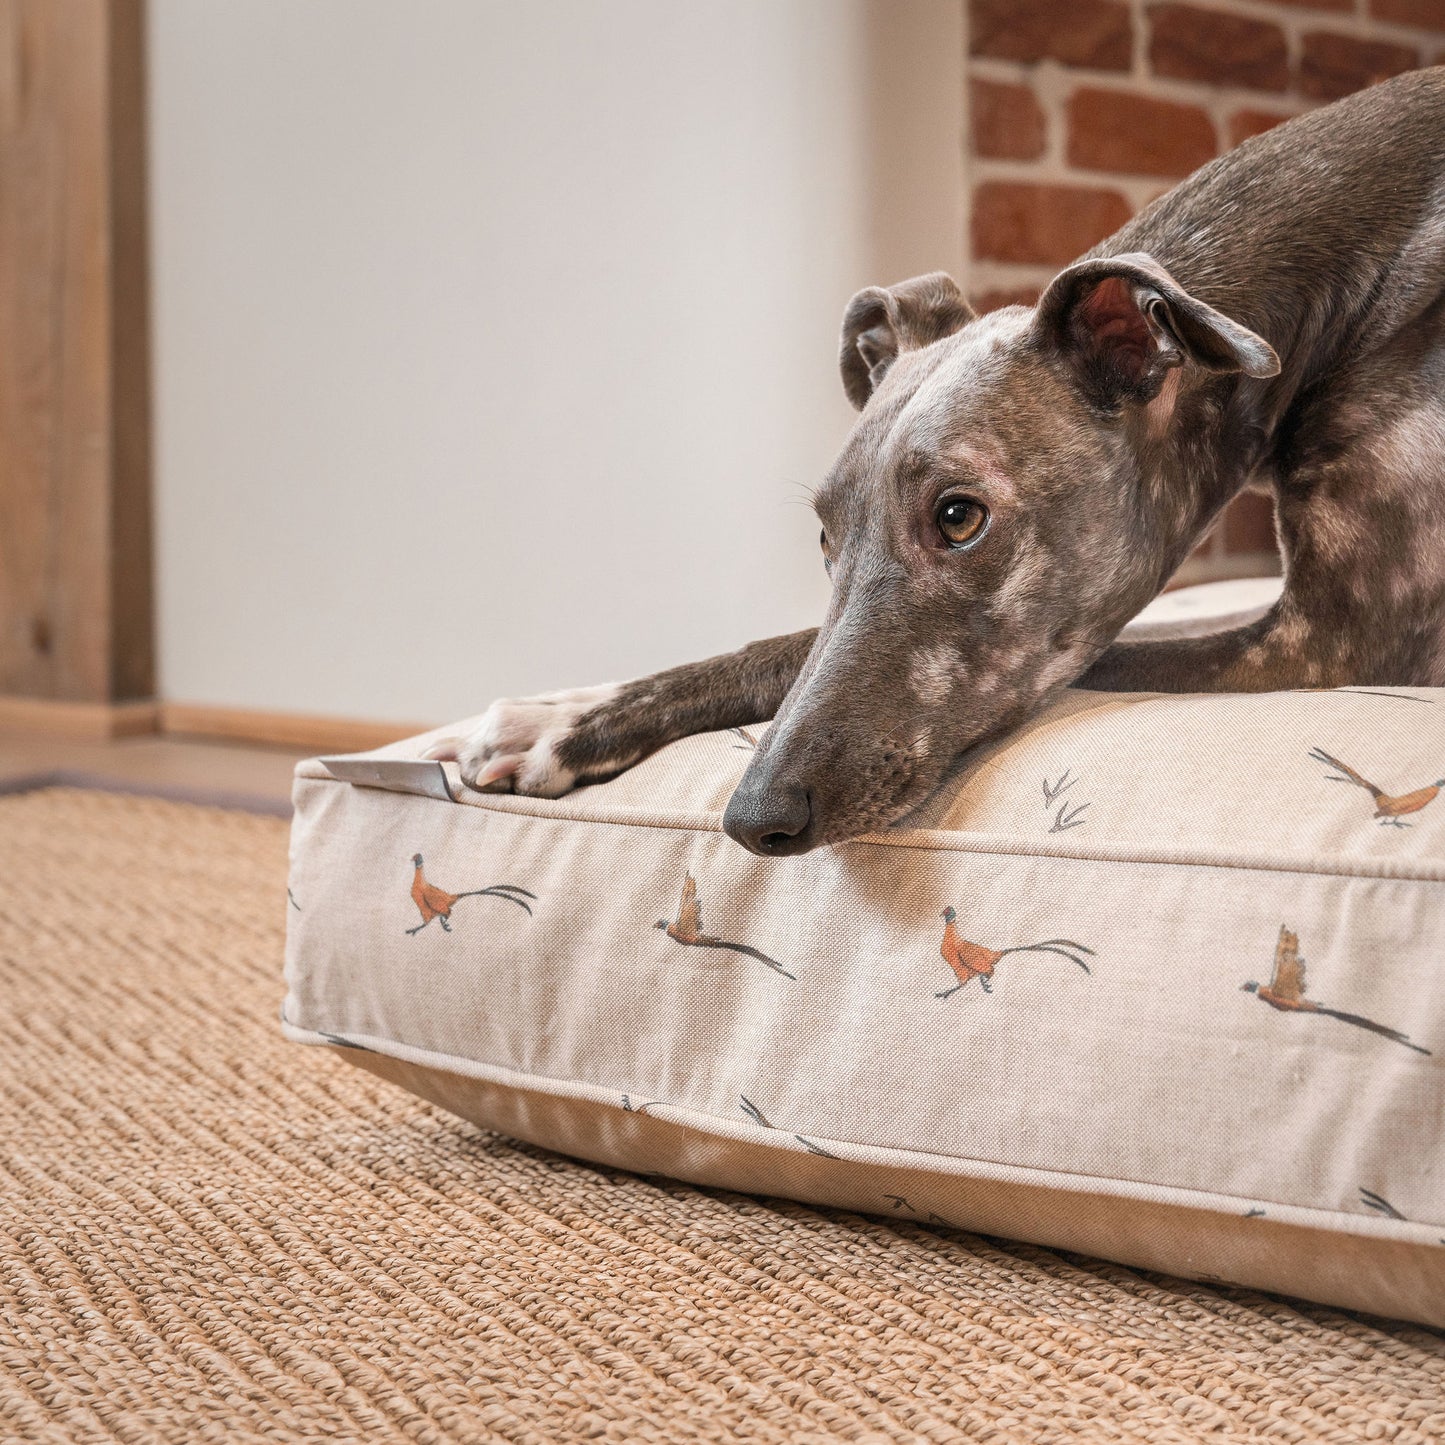 Luxury Dog Cushion, Available For Pet Personalization, Handmade Here at Lords & Labradors US! Order The Perfect Pet Cushion Today For The Ultimate Burrow!